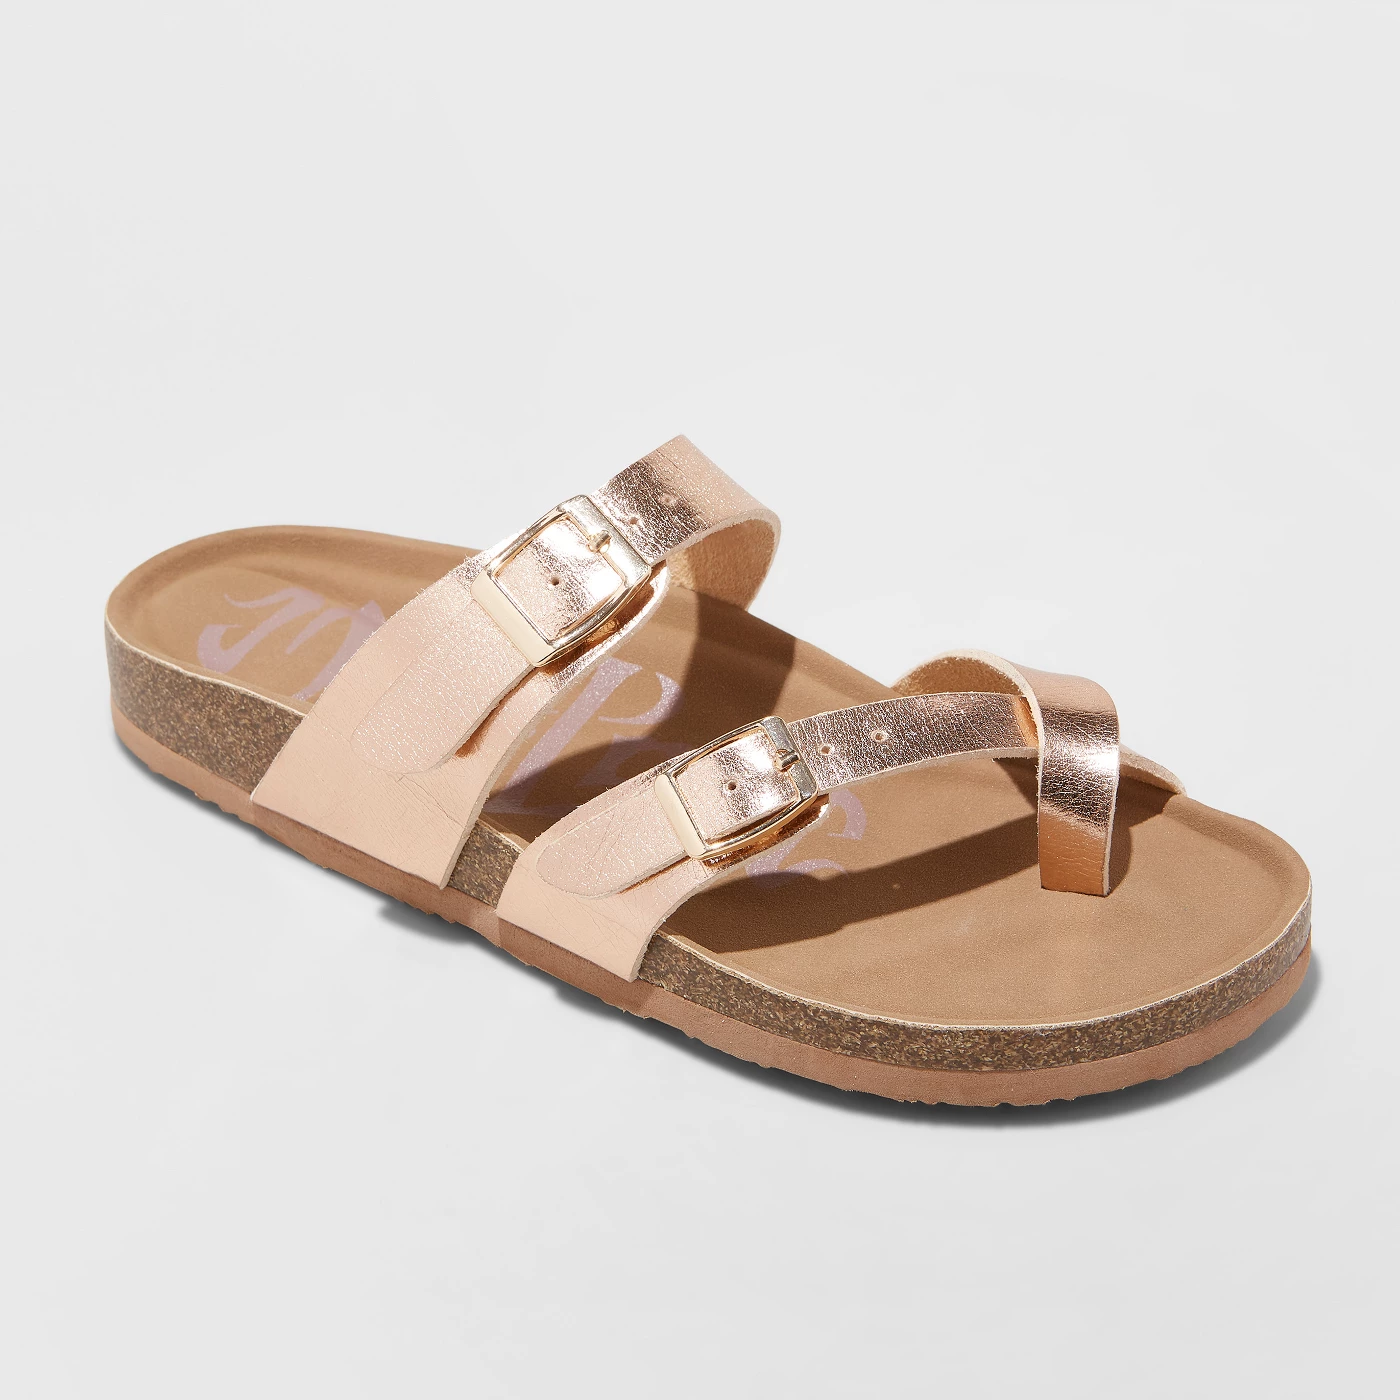 Women's Mad Love Prudence Footbed Sandal - image 1 of 3